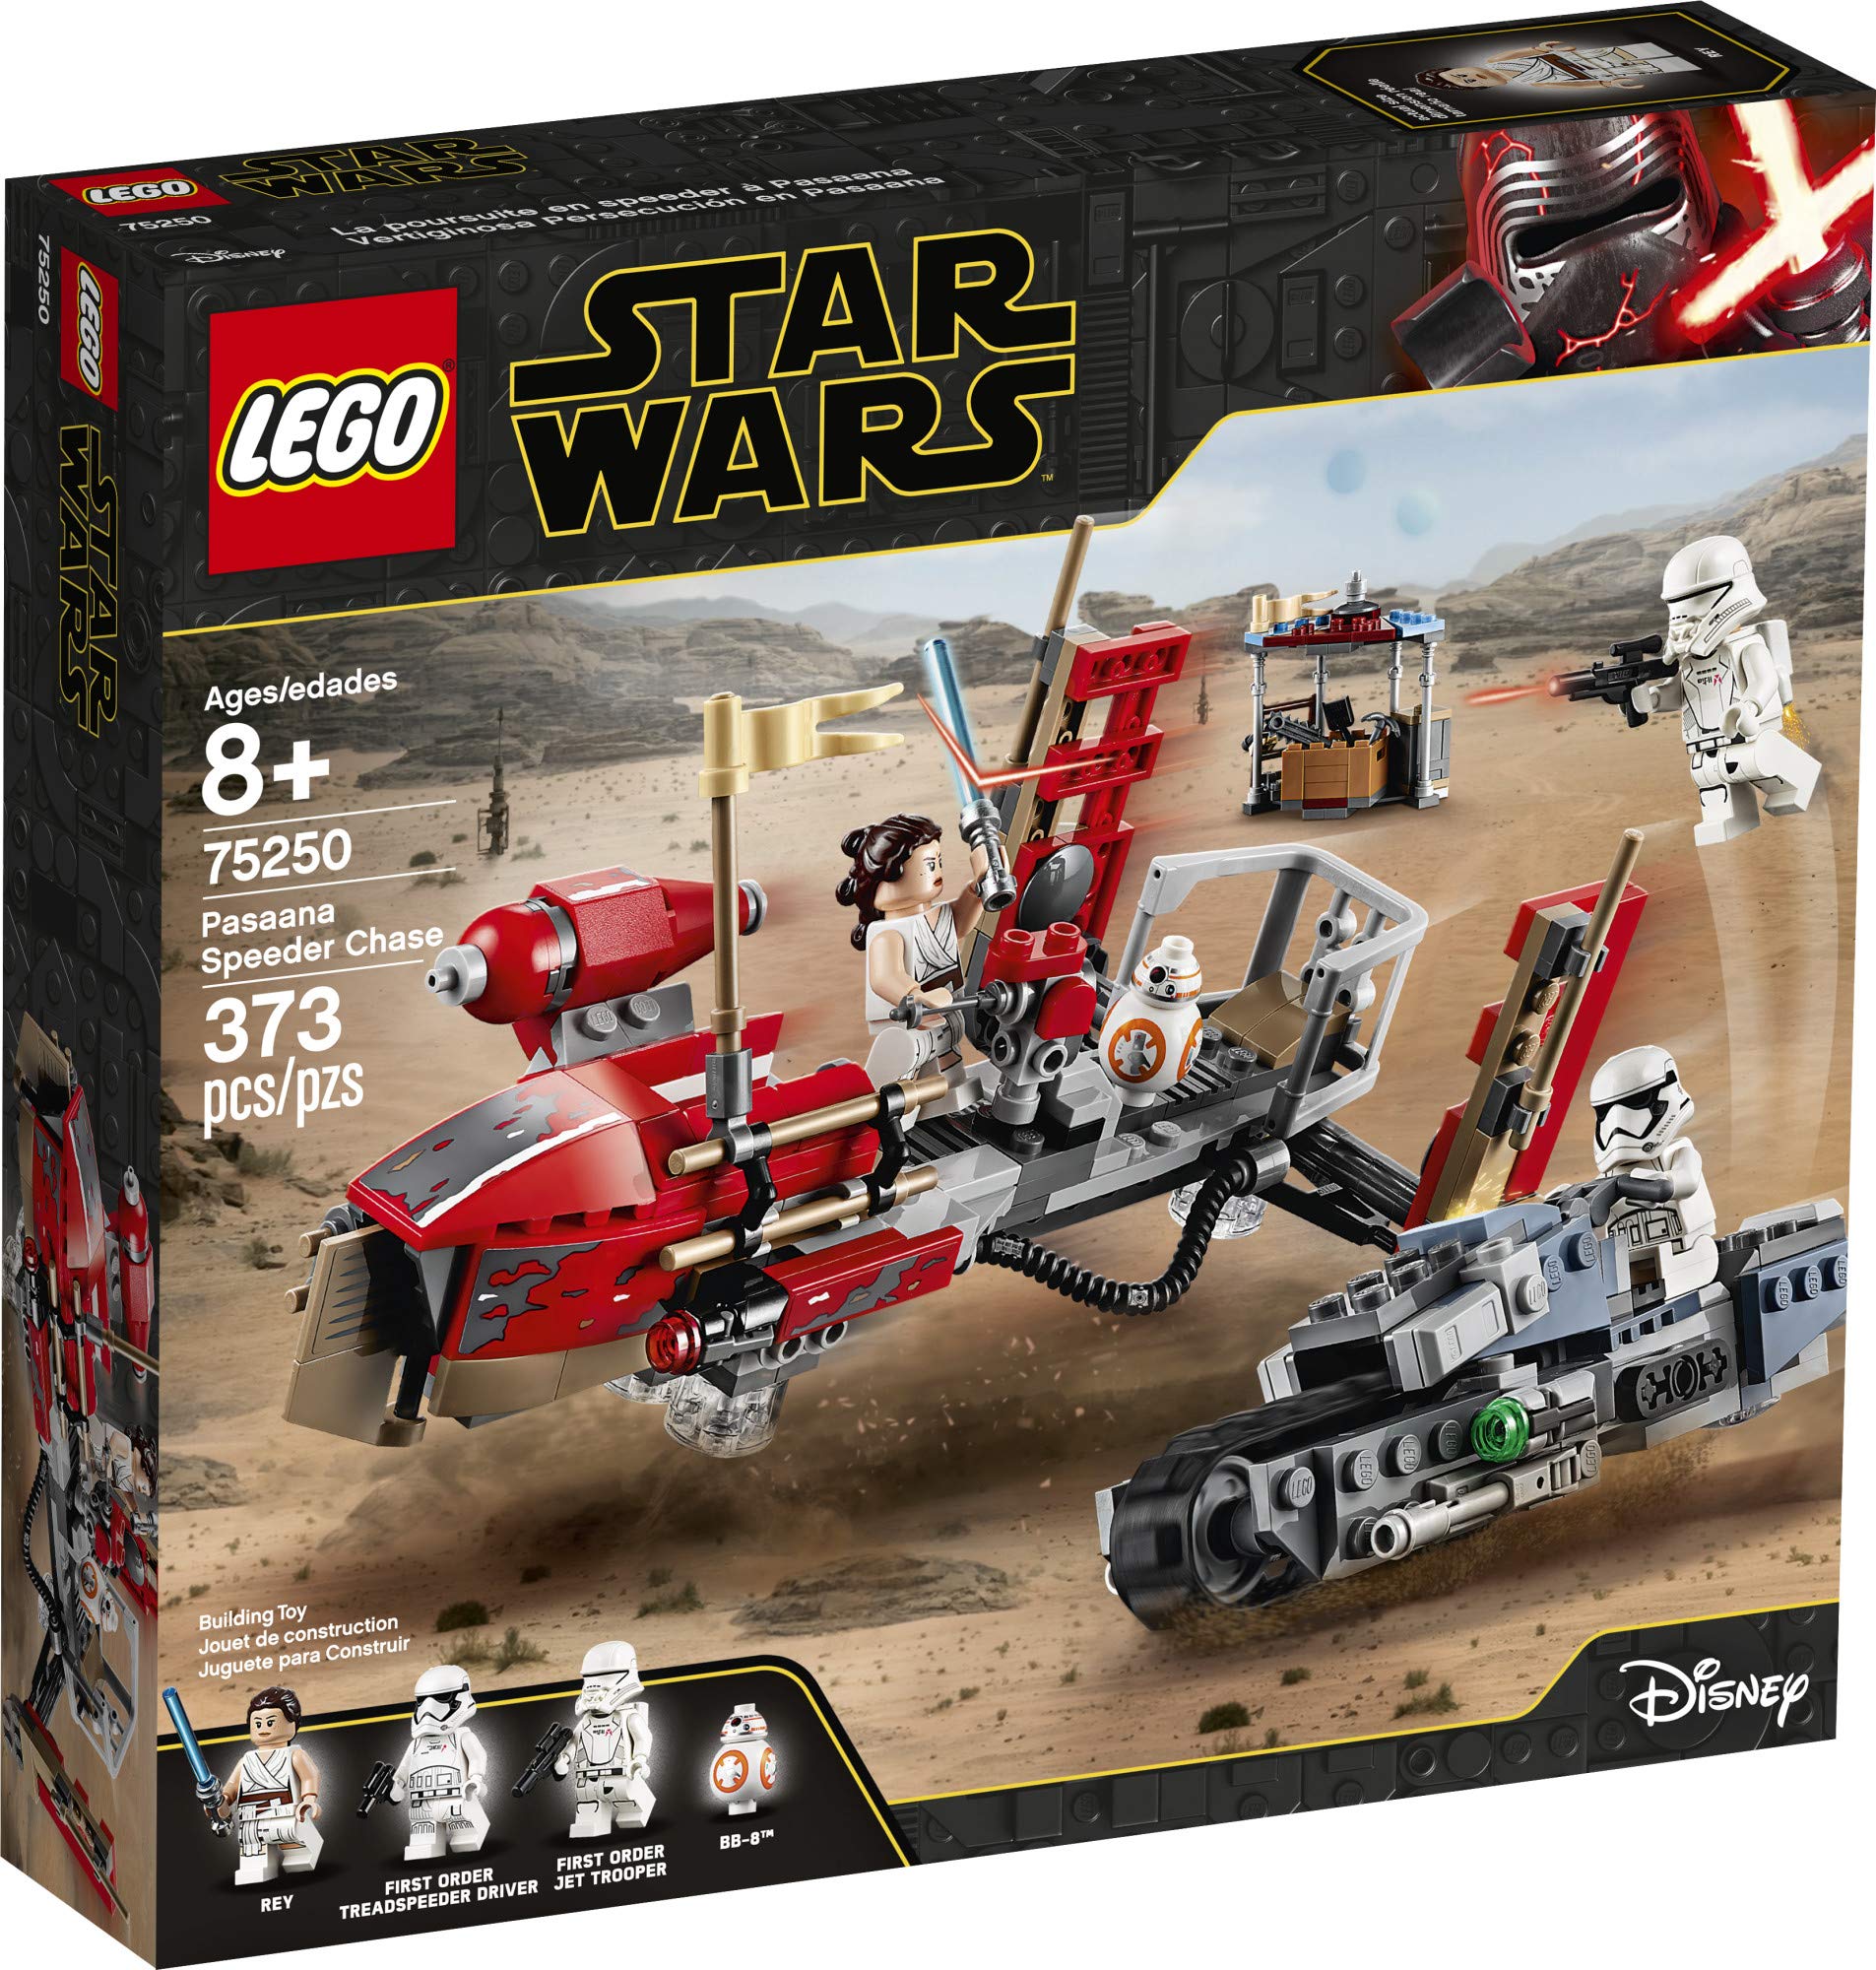 LEGO Star Wars: The Rise of Skywalker Pasaana Speeder Chase 75250 Hovering Transport Speeder Building Kit with Action Figures, New 2019 (373 Pieces)